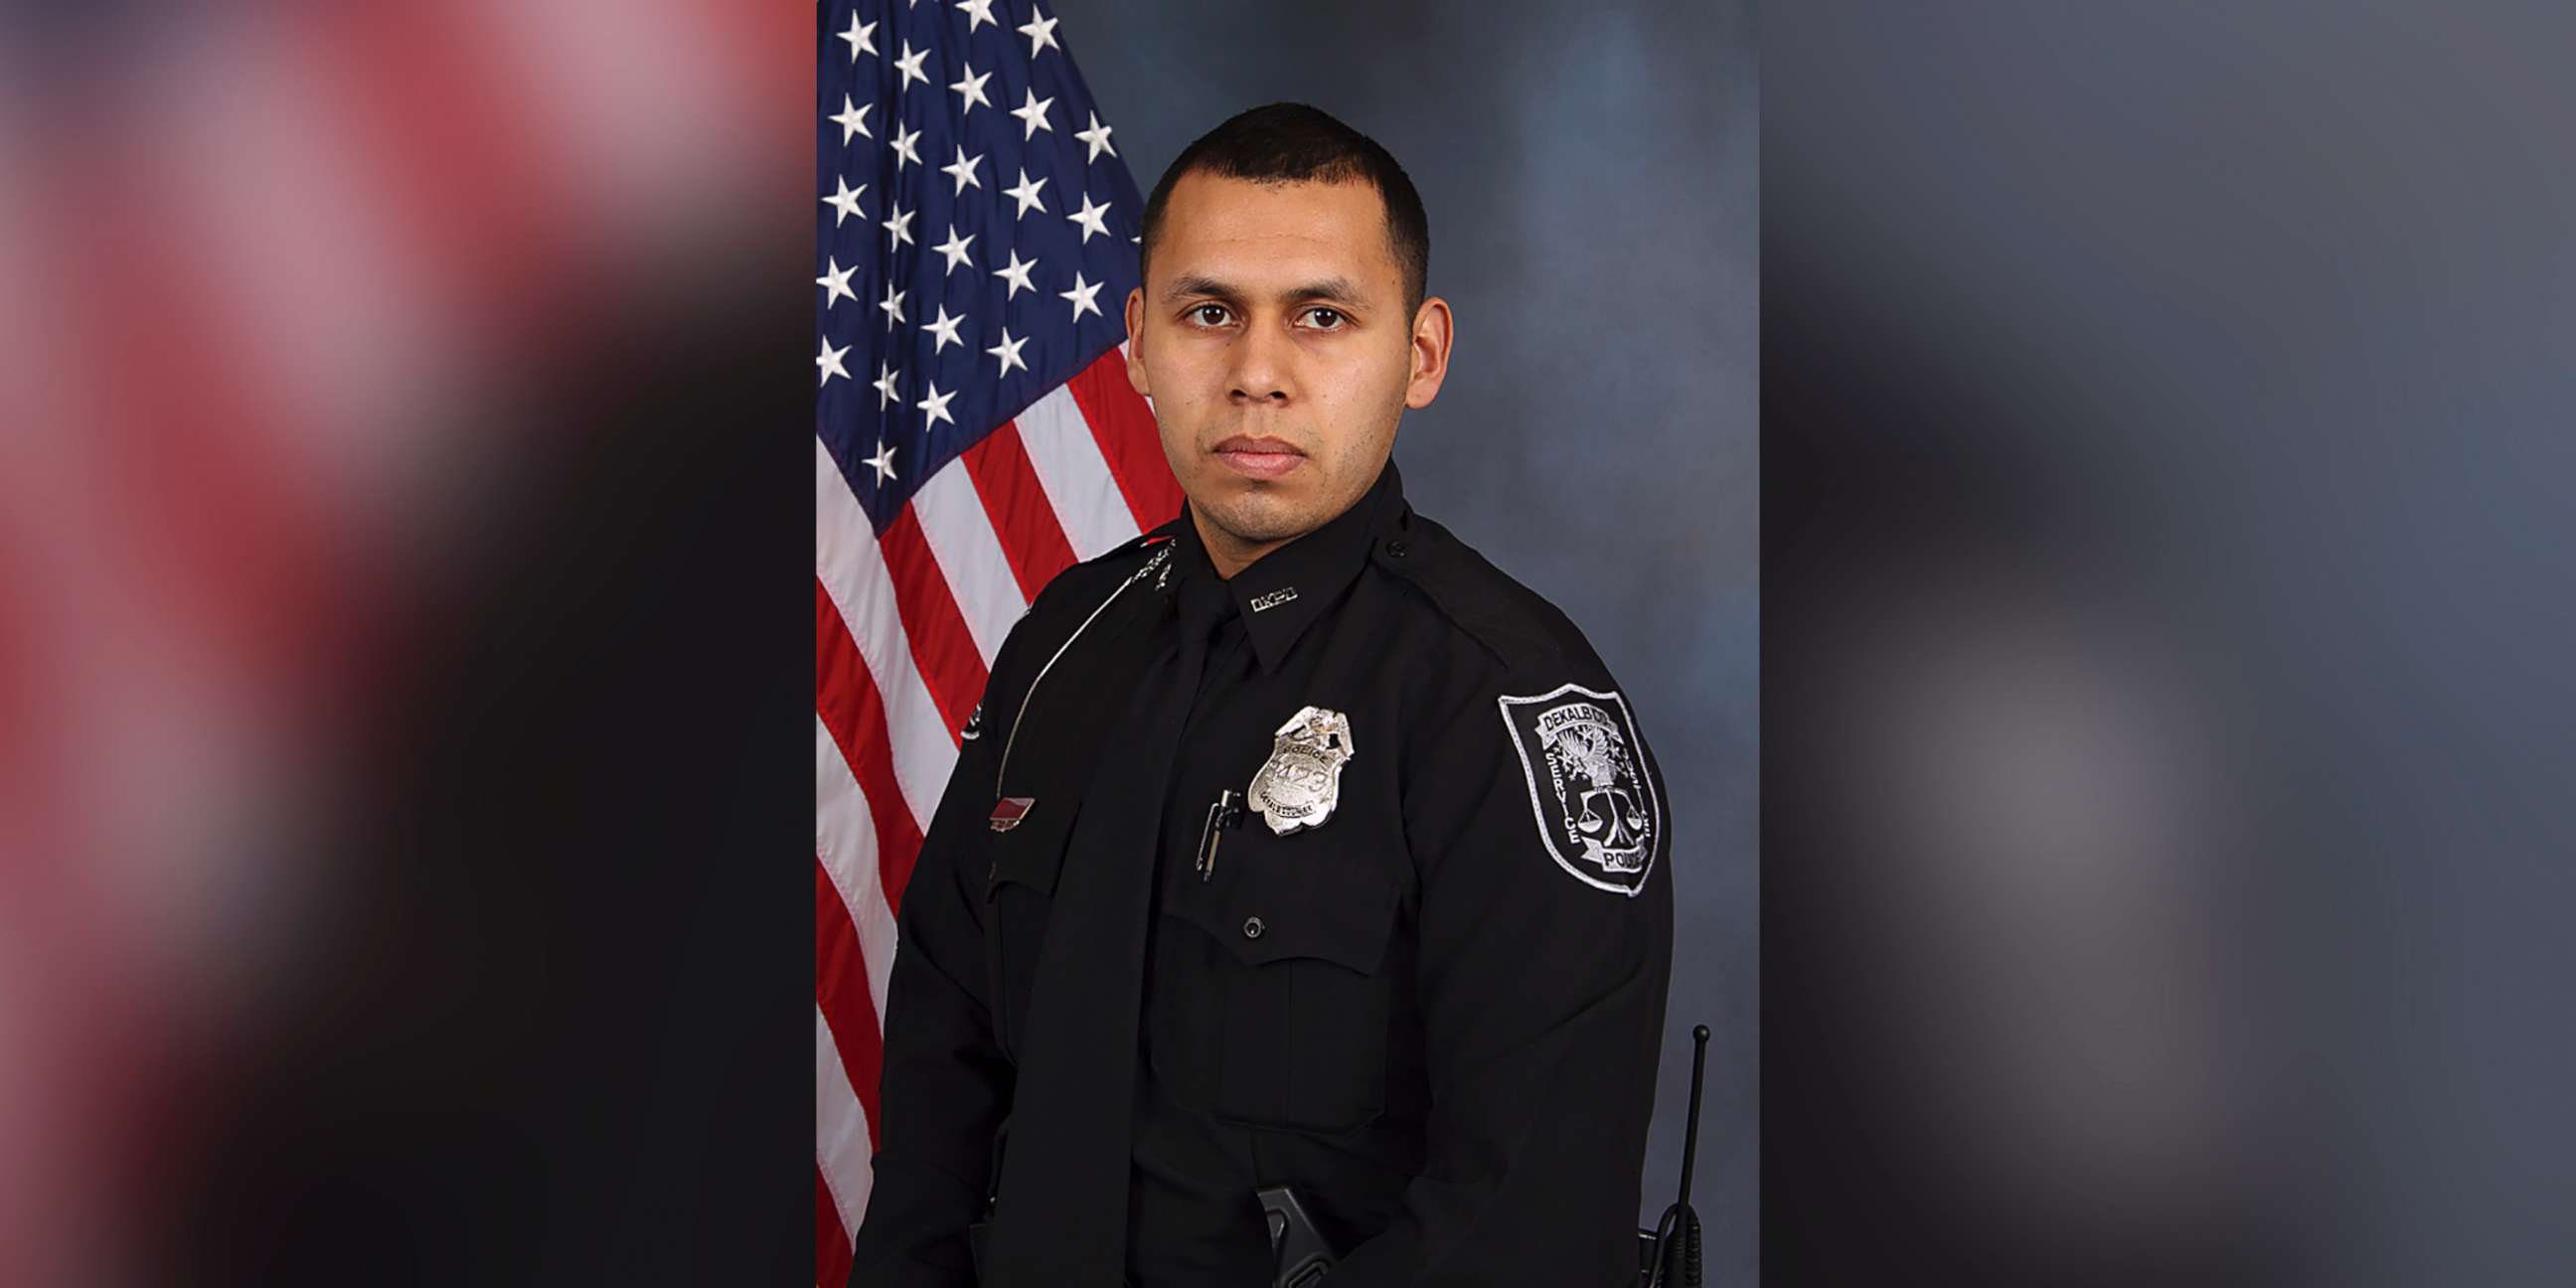 PHOTO: DeKalb County Police Officer Edgar Isidro Flores who was gunned down after a traffic stop and foot chase east of Atlanta, Dec. 13, 2018.